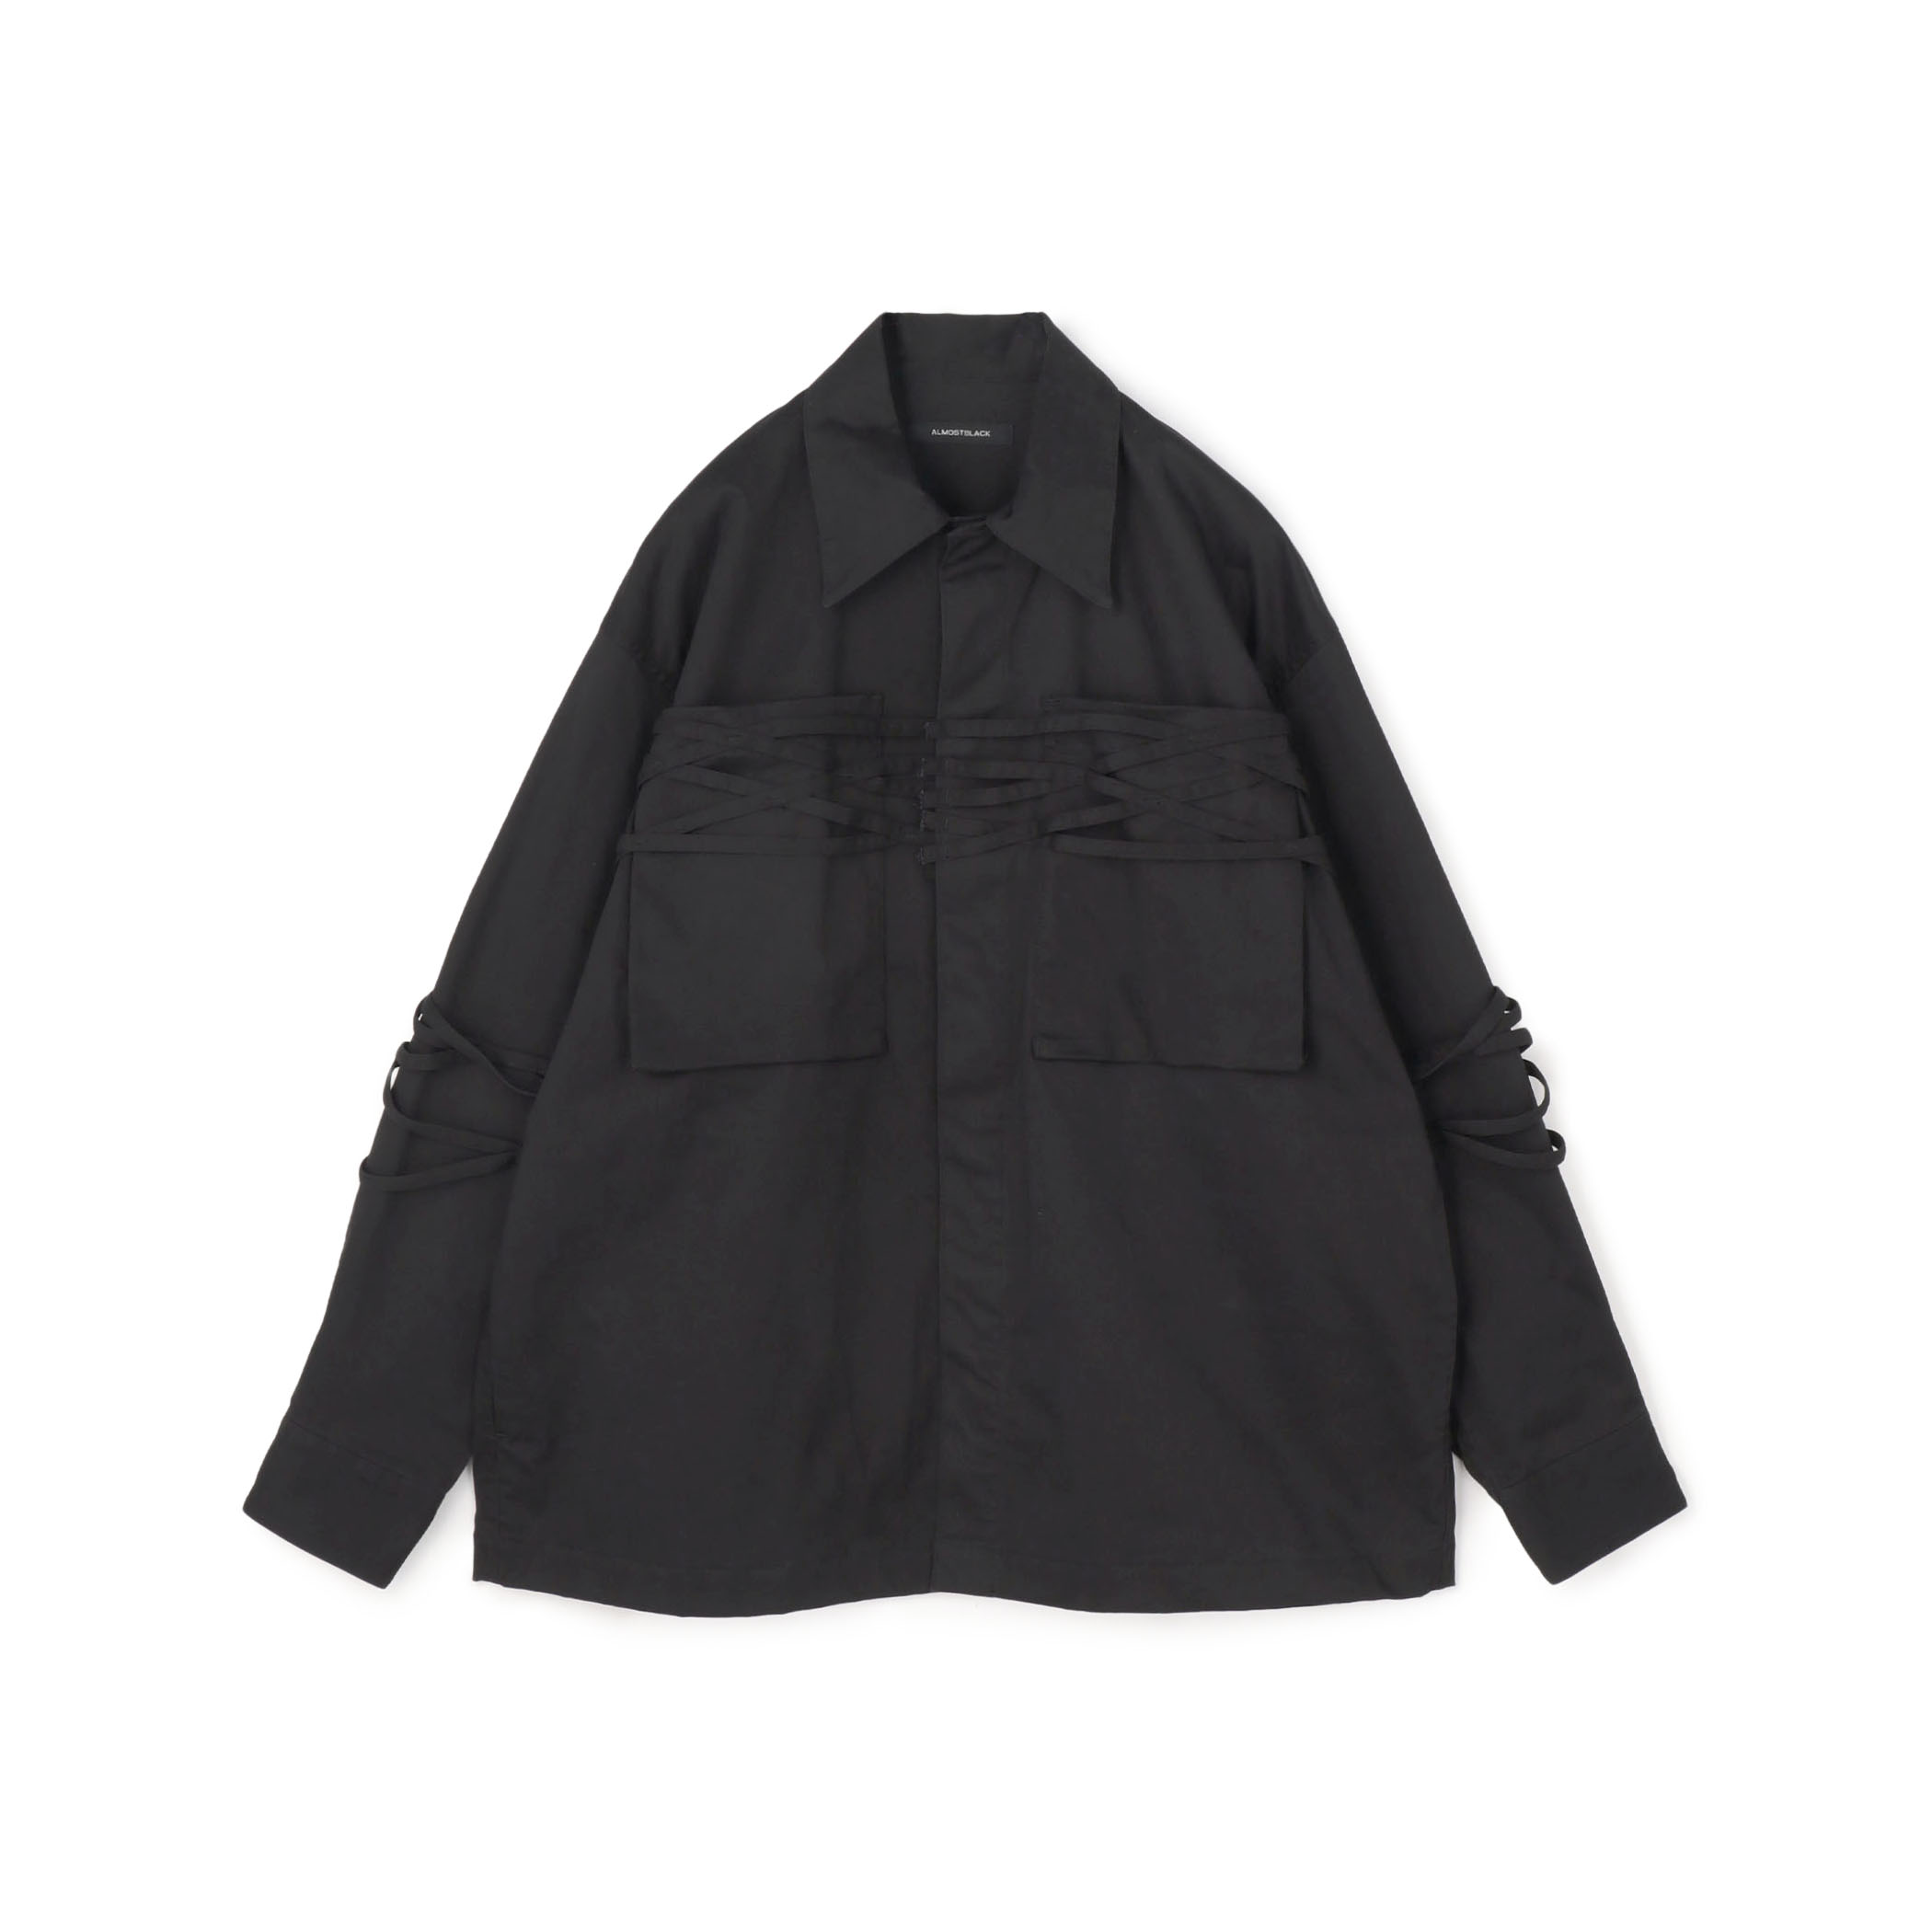 ALMOSTBLACK WOVEN IVY TAPE MILITARY JACKET｜トゥモローランド 公式通販